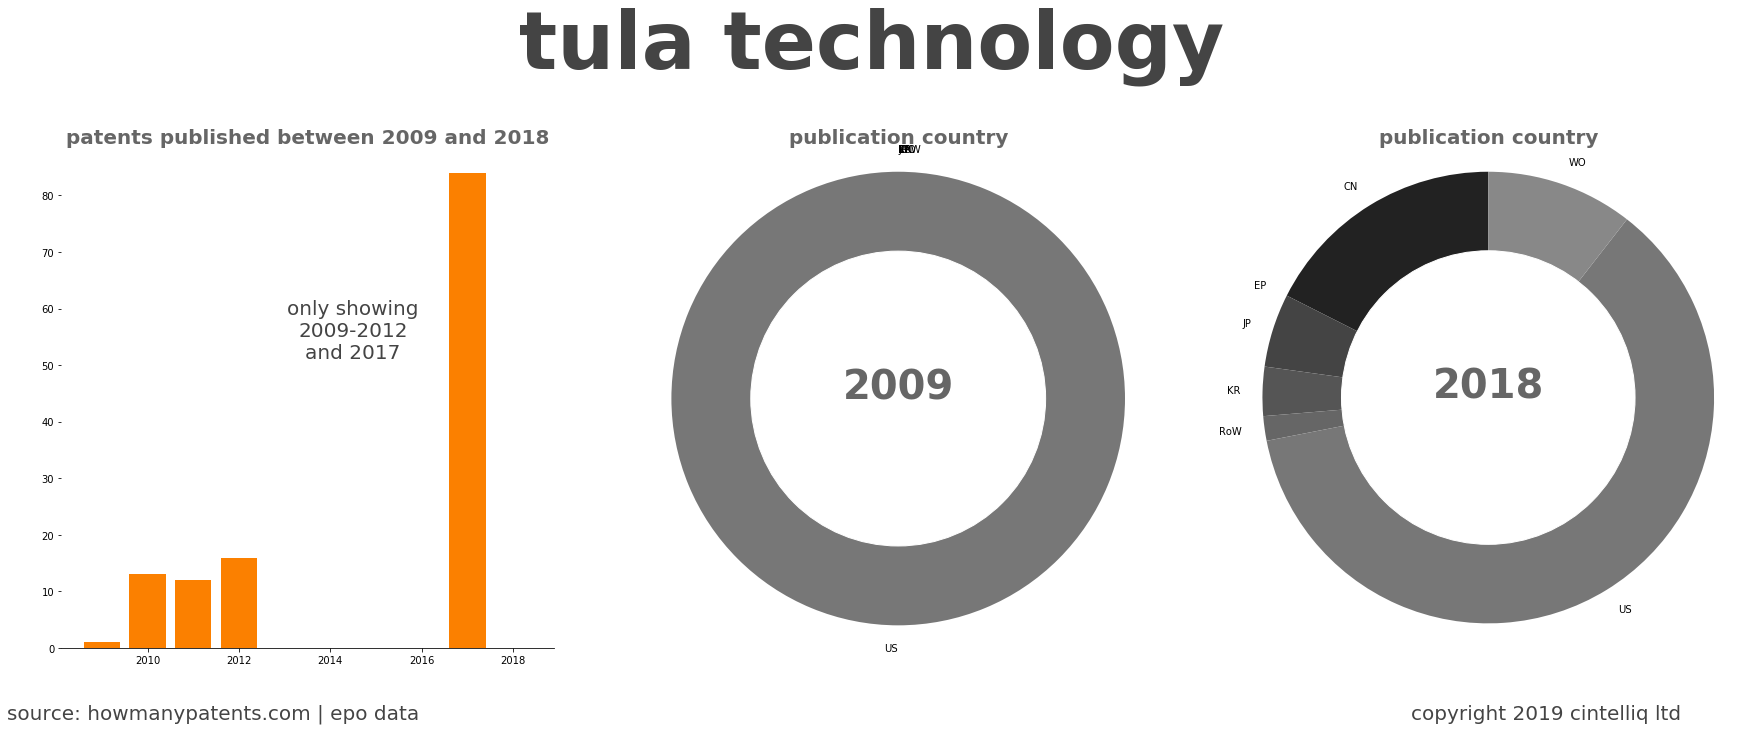 summary of patents for Tula Technology